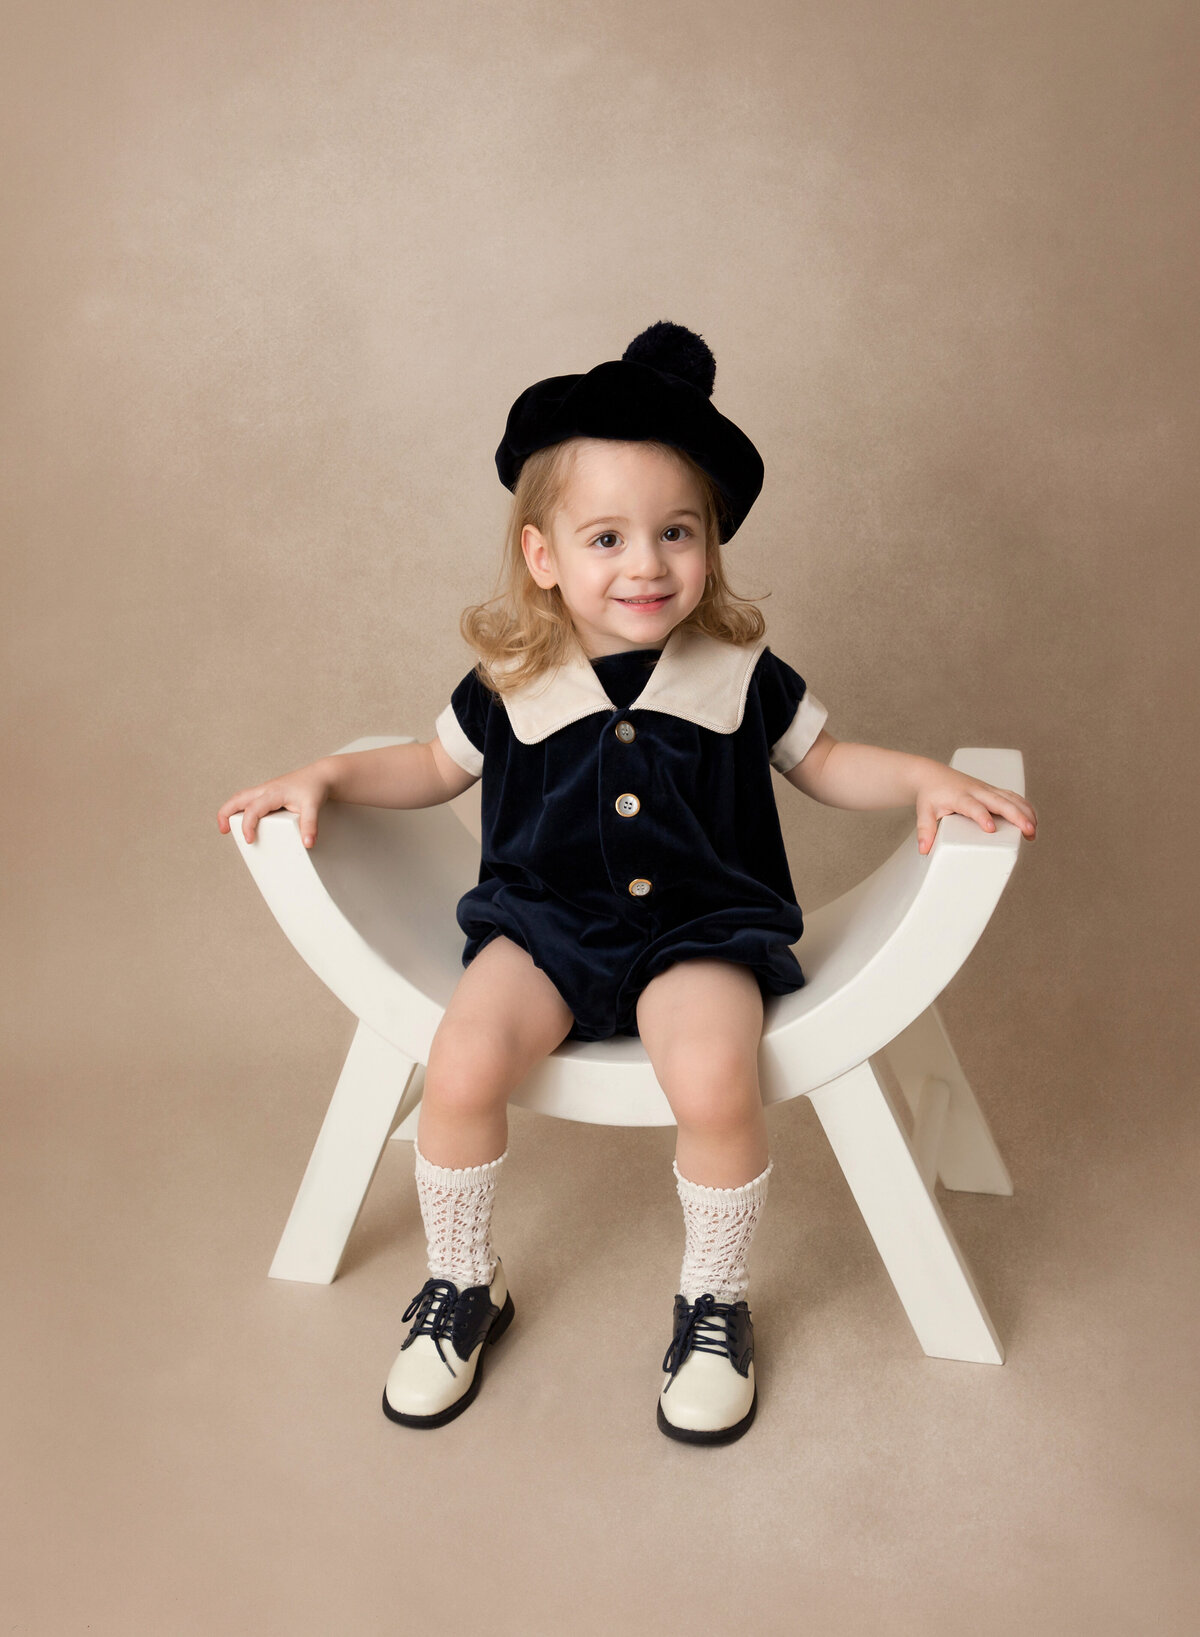 Toddler girl sitting on a char for a milestone portrait. She is smiling at the camera.